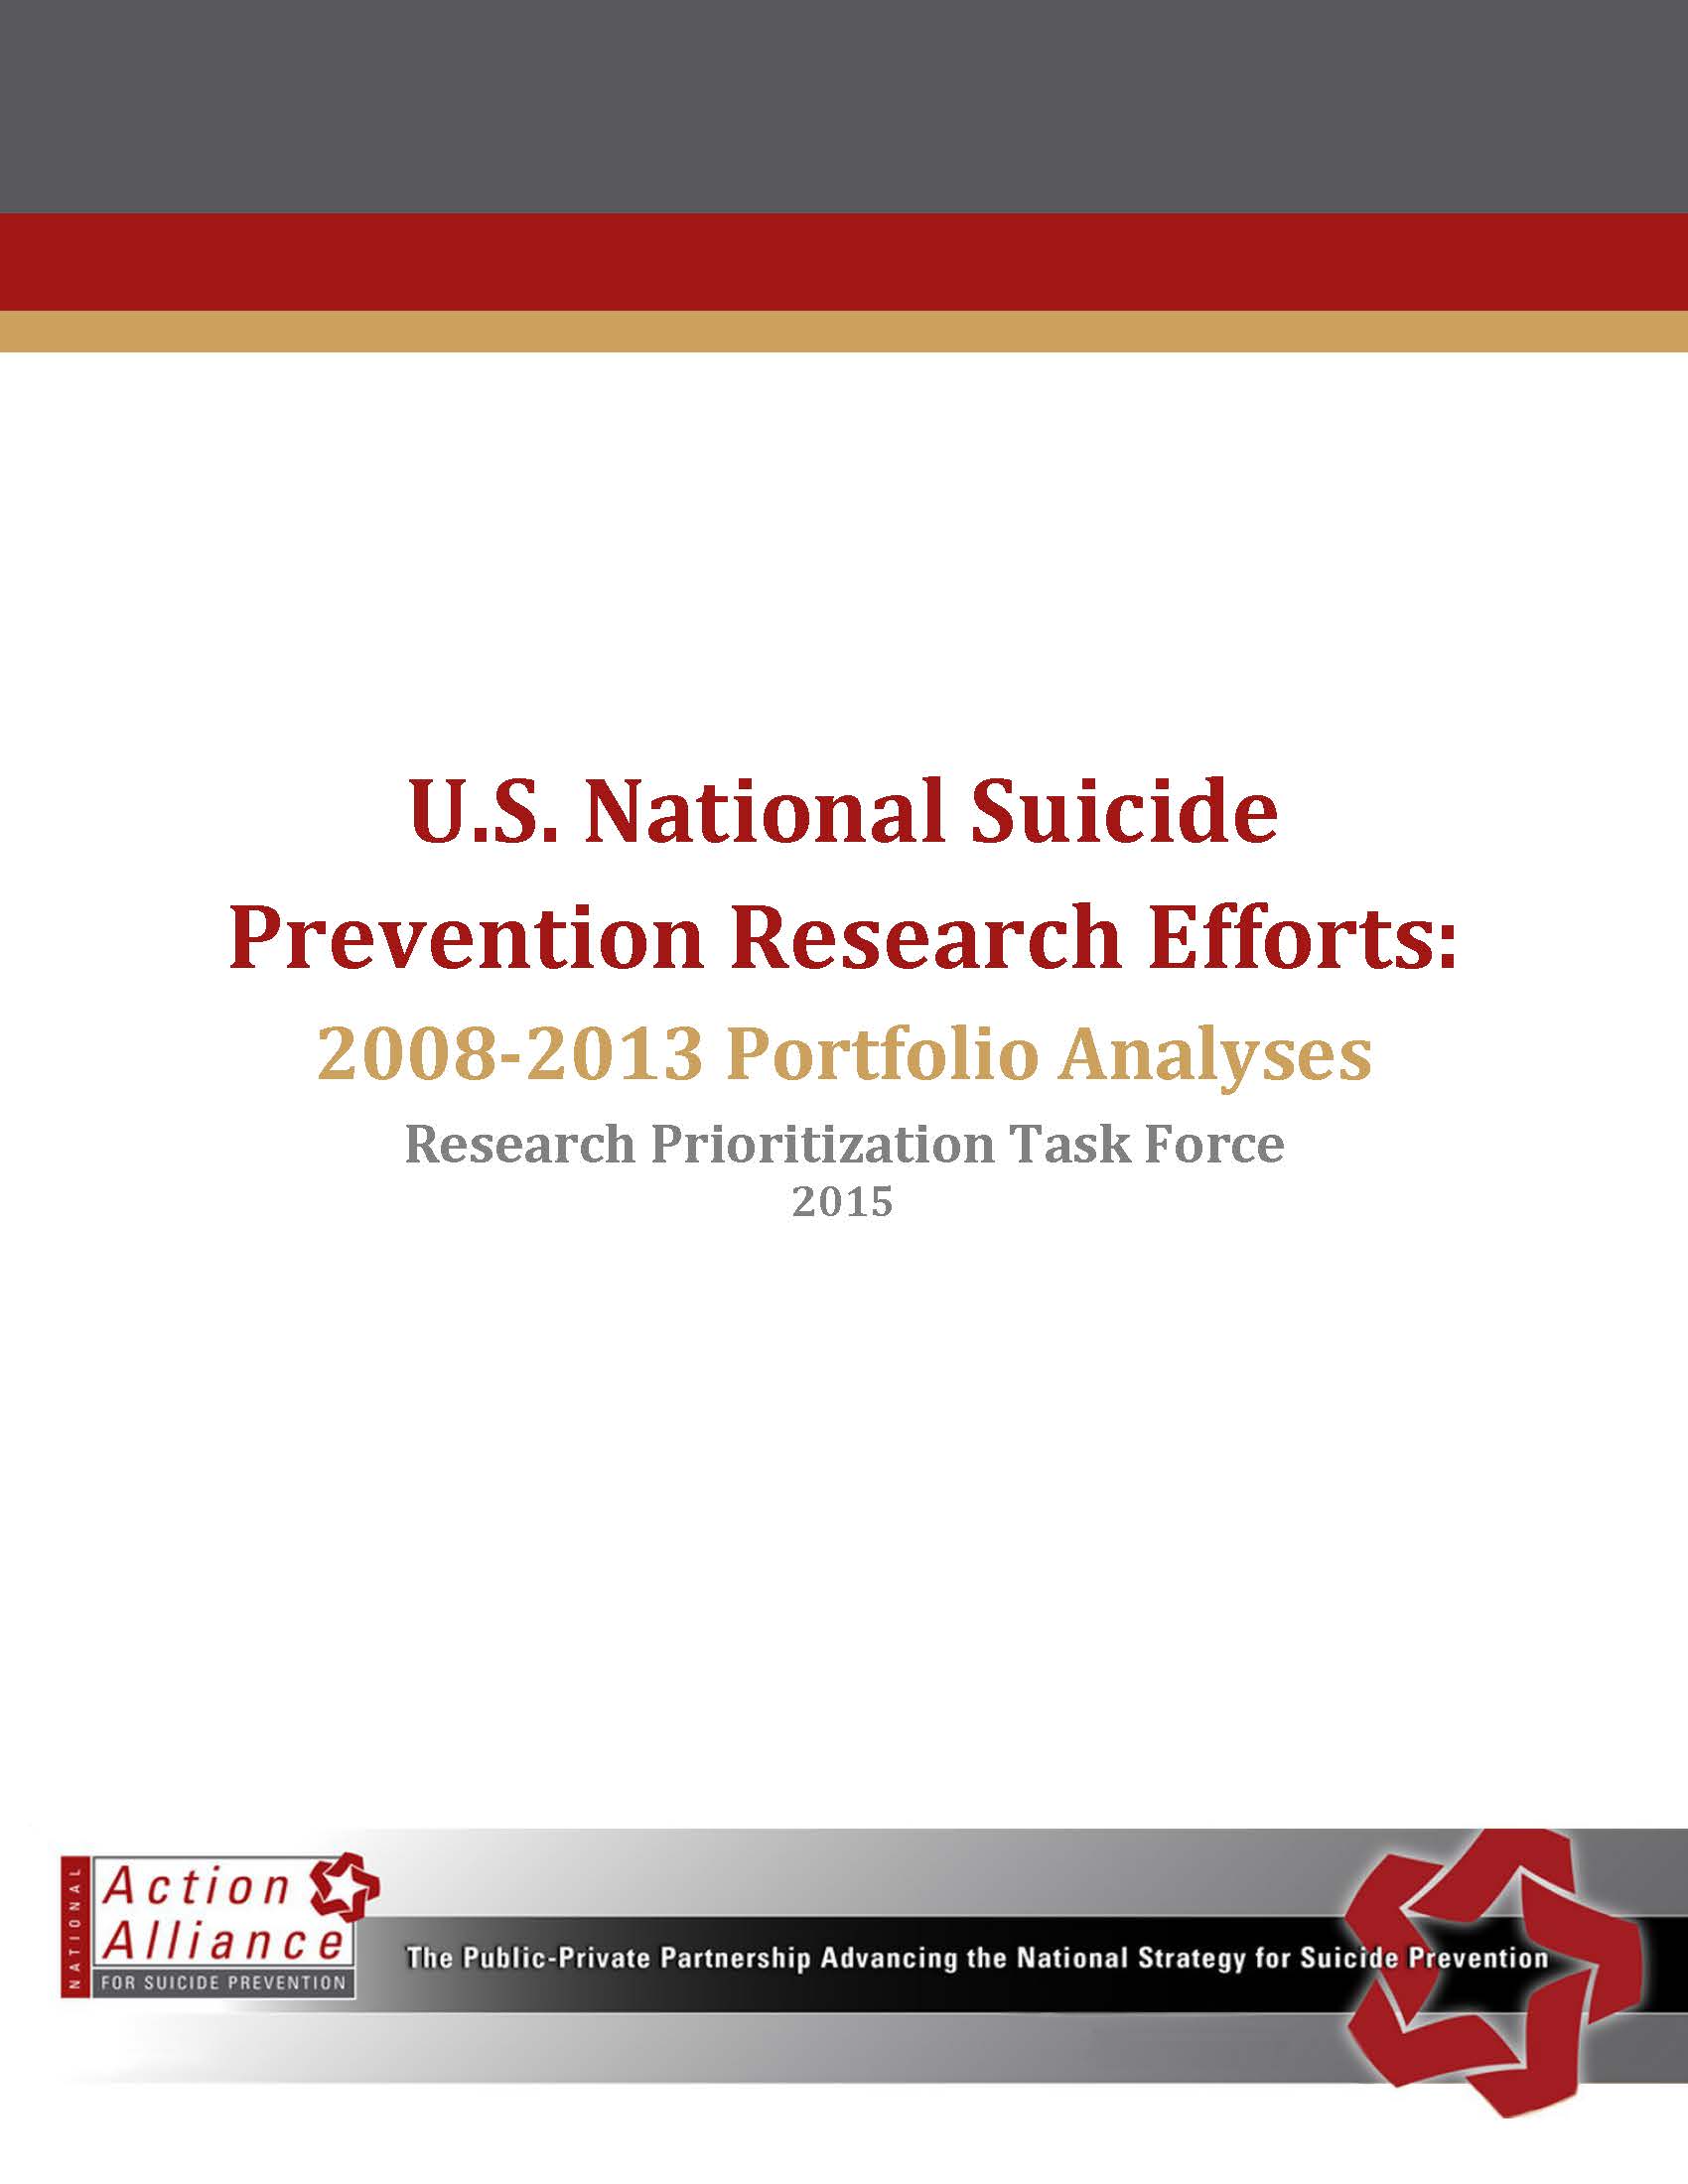  U.S. National Suicide Prevention Research Efforts: 2008-2013 Portfolio Analyses